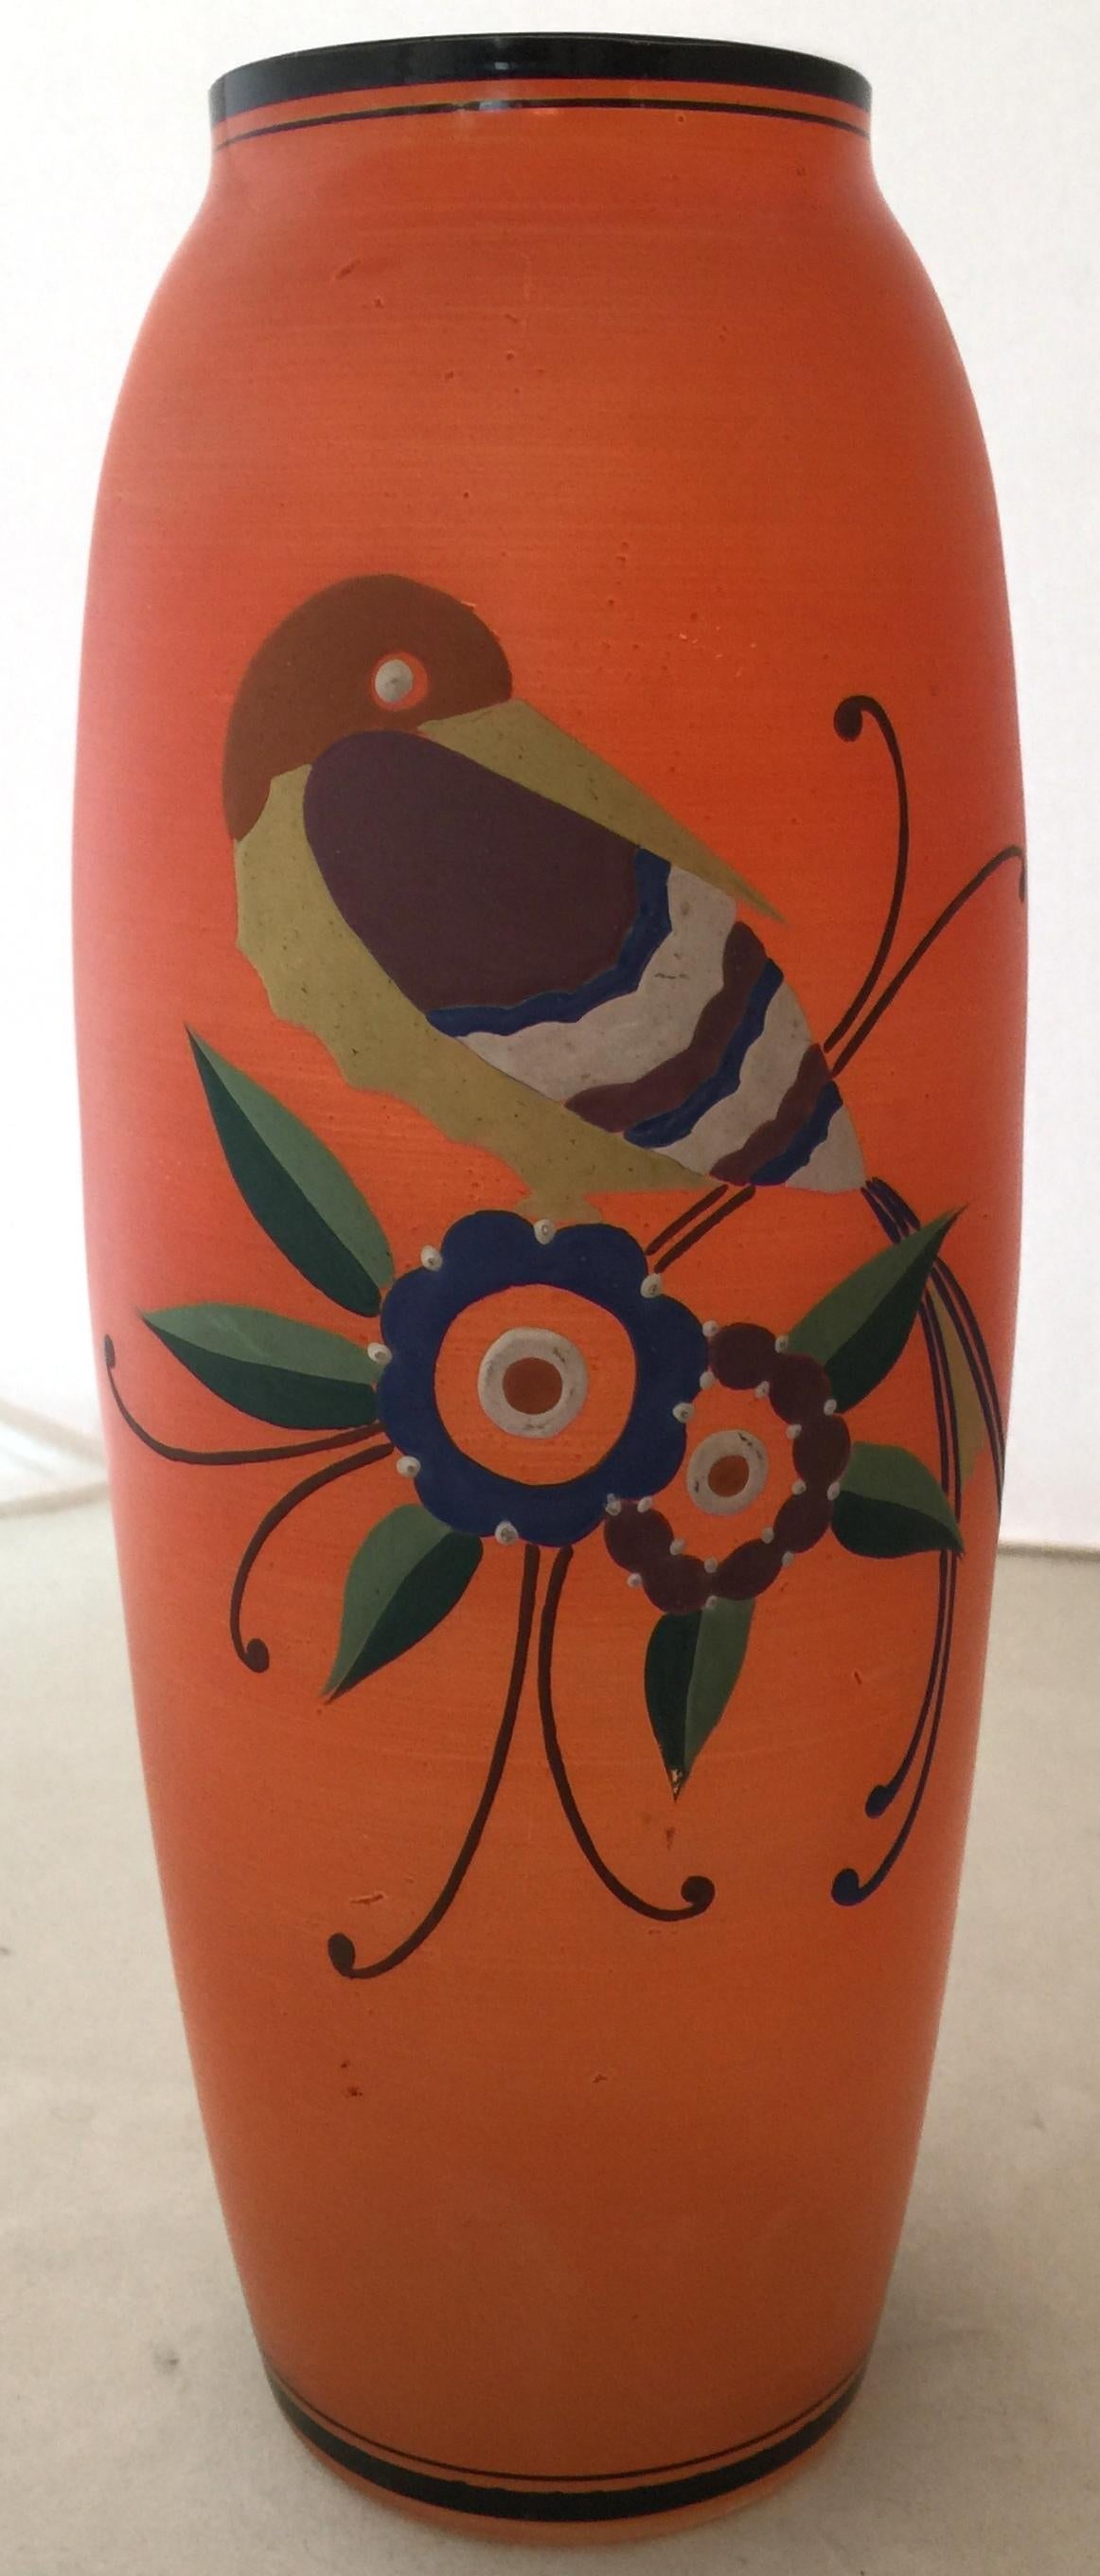 Vase
We have specialized in the sale of Art Deco and Art Nouveau and Vintage styles since 1982. If you have any questions we are at your disposal.
Pushing the button that reads 'View All From Seller'. And you can see more objects to the style for